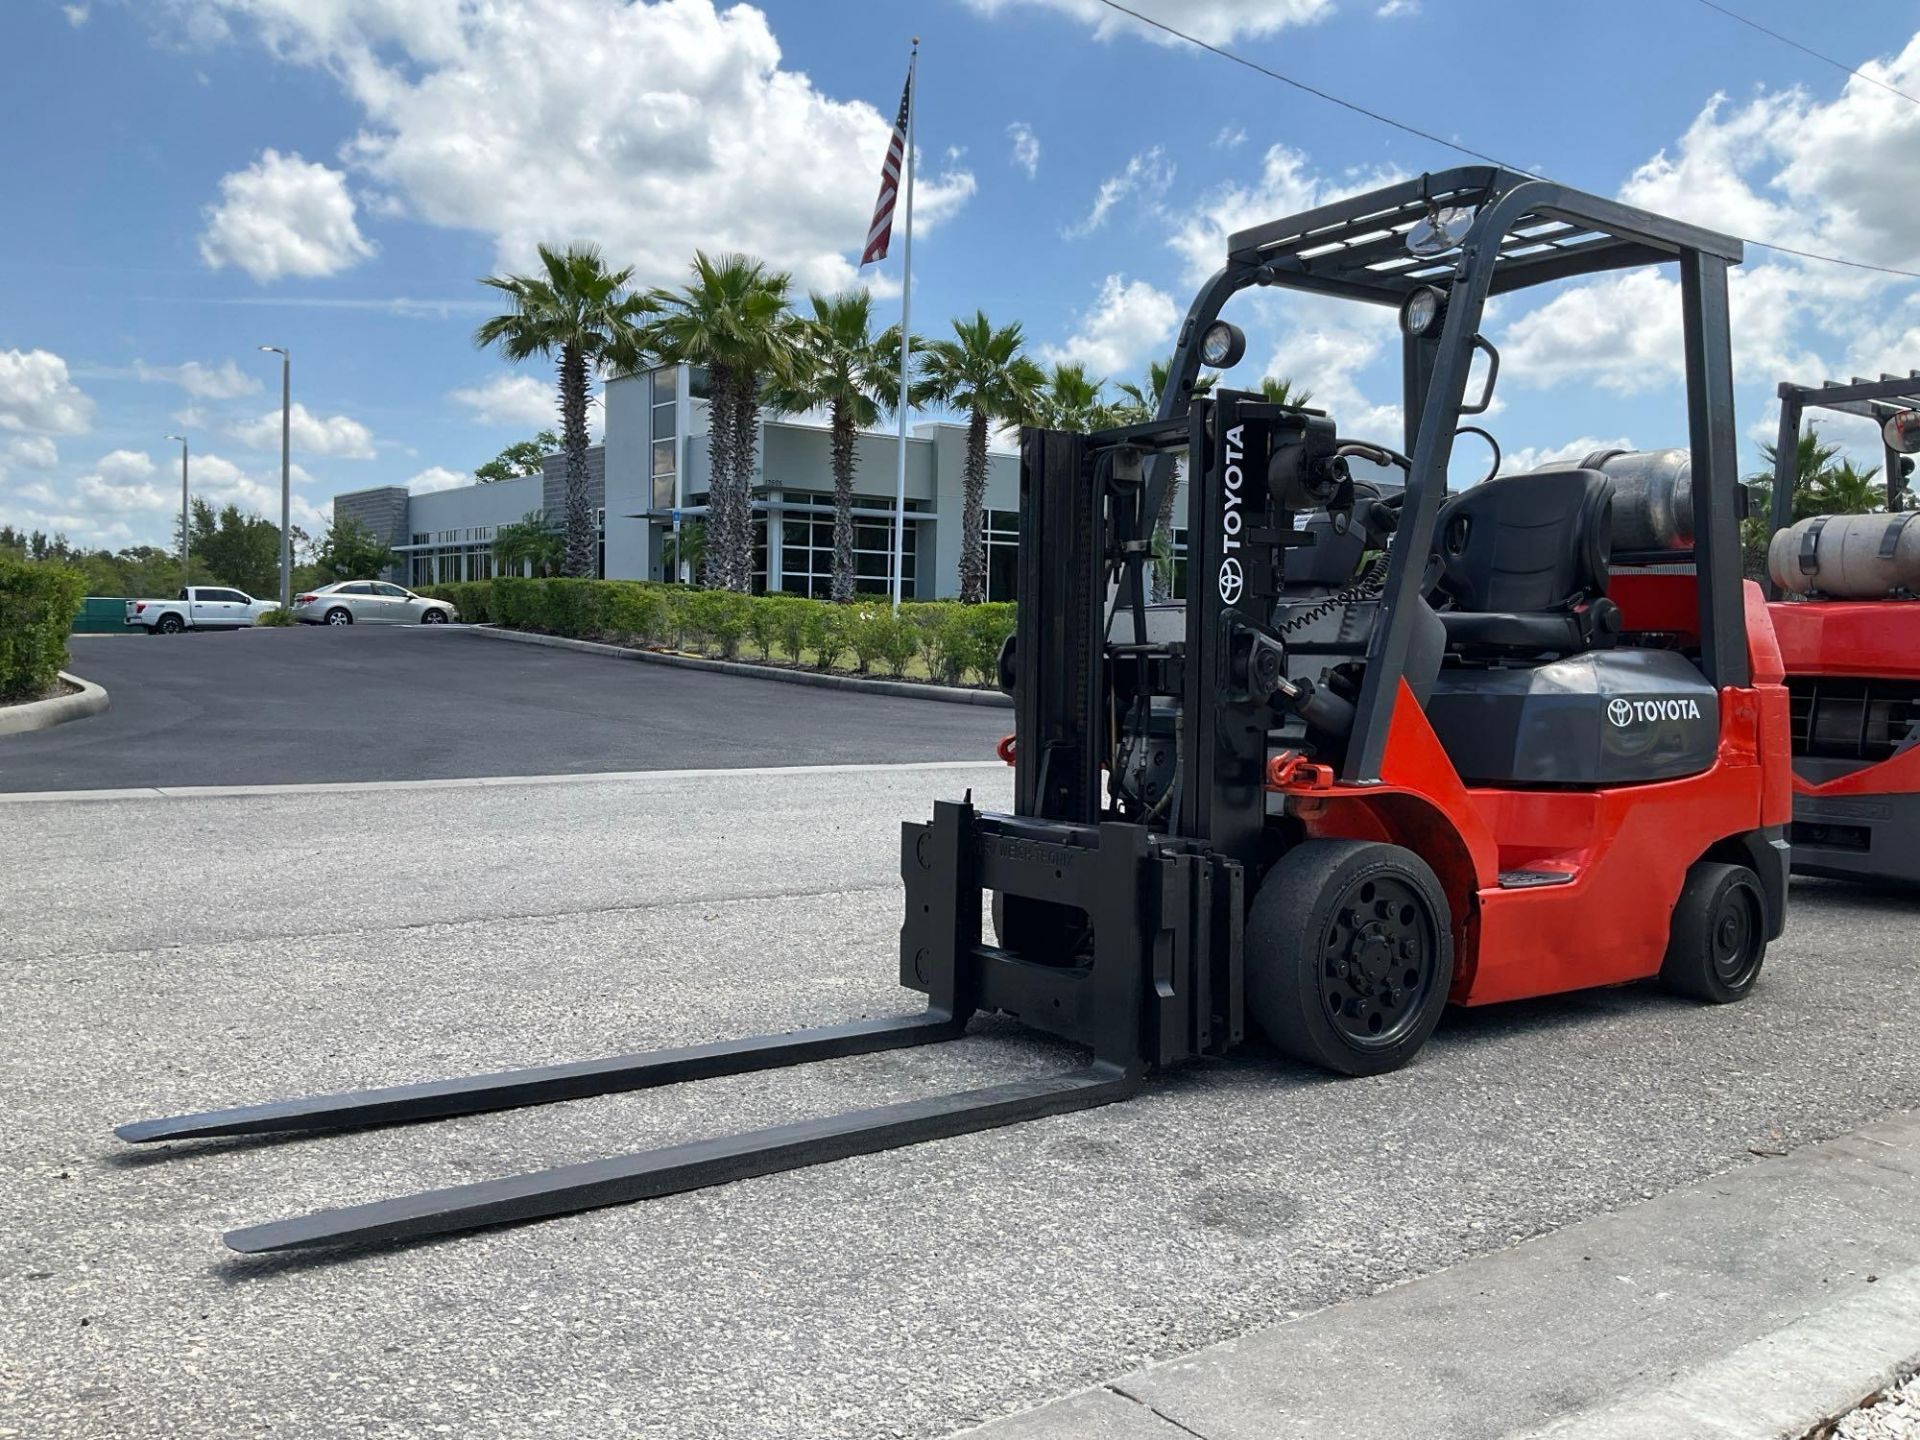 TOYOTA FORKLIFT MODEL 7FGCU25, LP POWERED, APPROX MAX CAPACITY 4700, MAX HEIGHT 80in, TILT, SIDE - Image 2 of 14